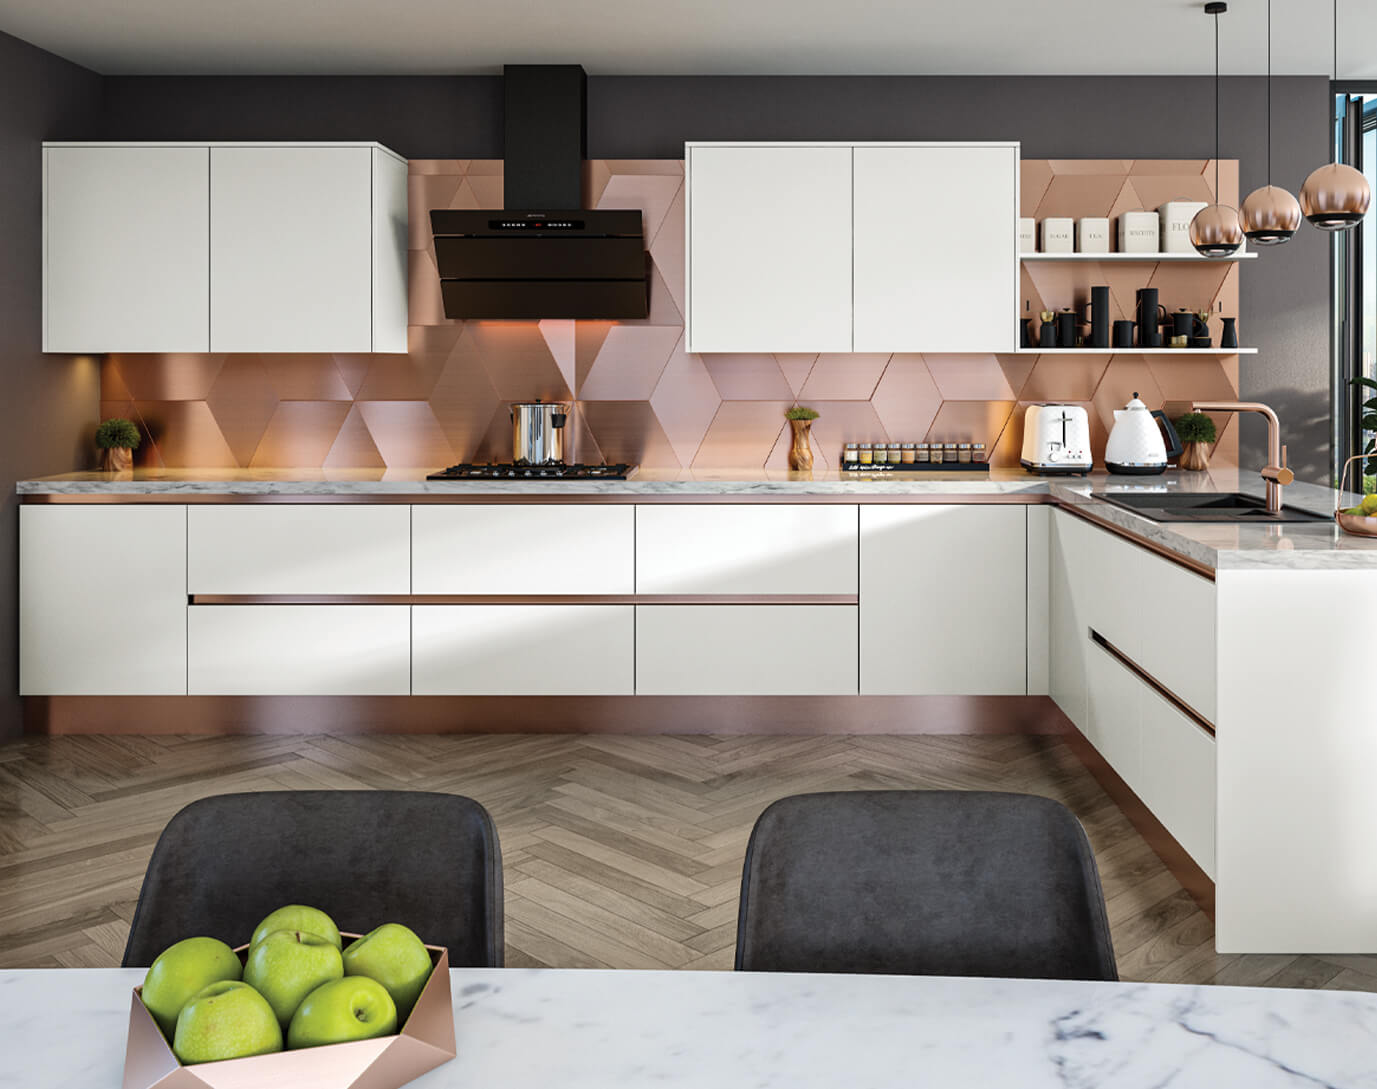 Kitchen Trend Predictions for 2022